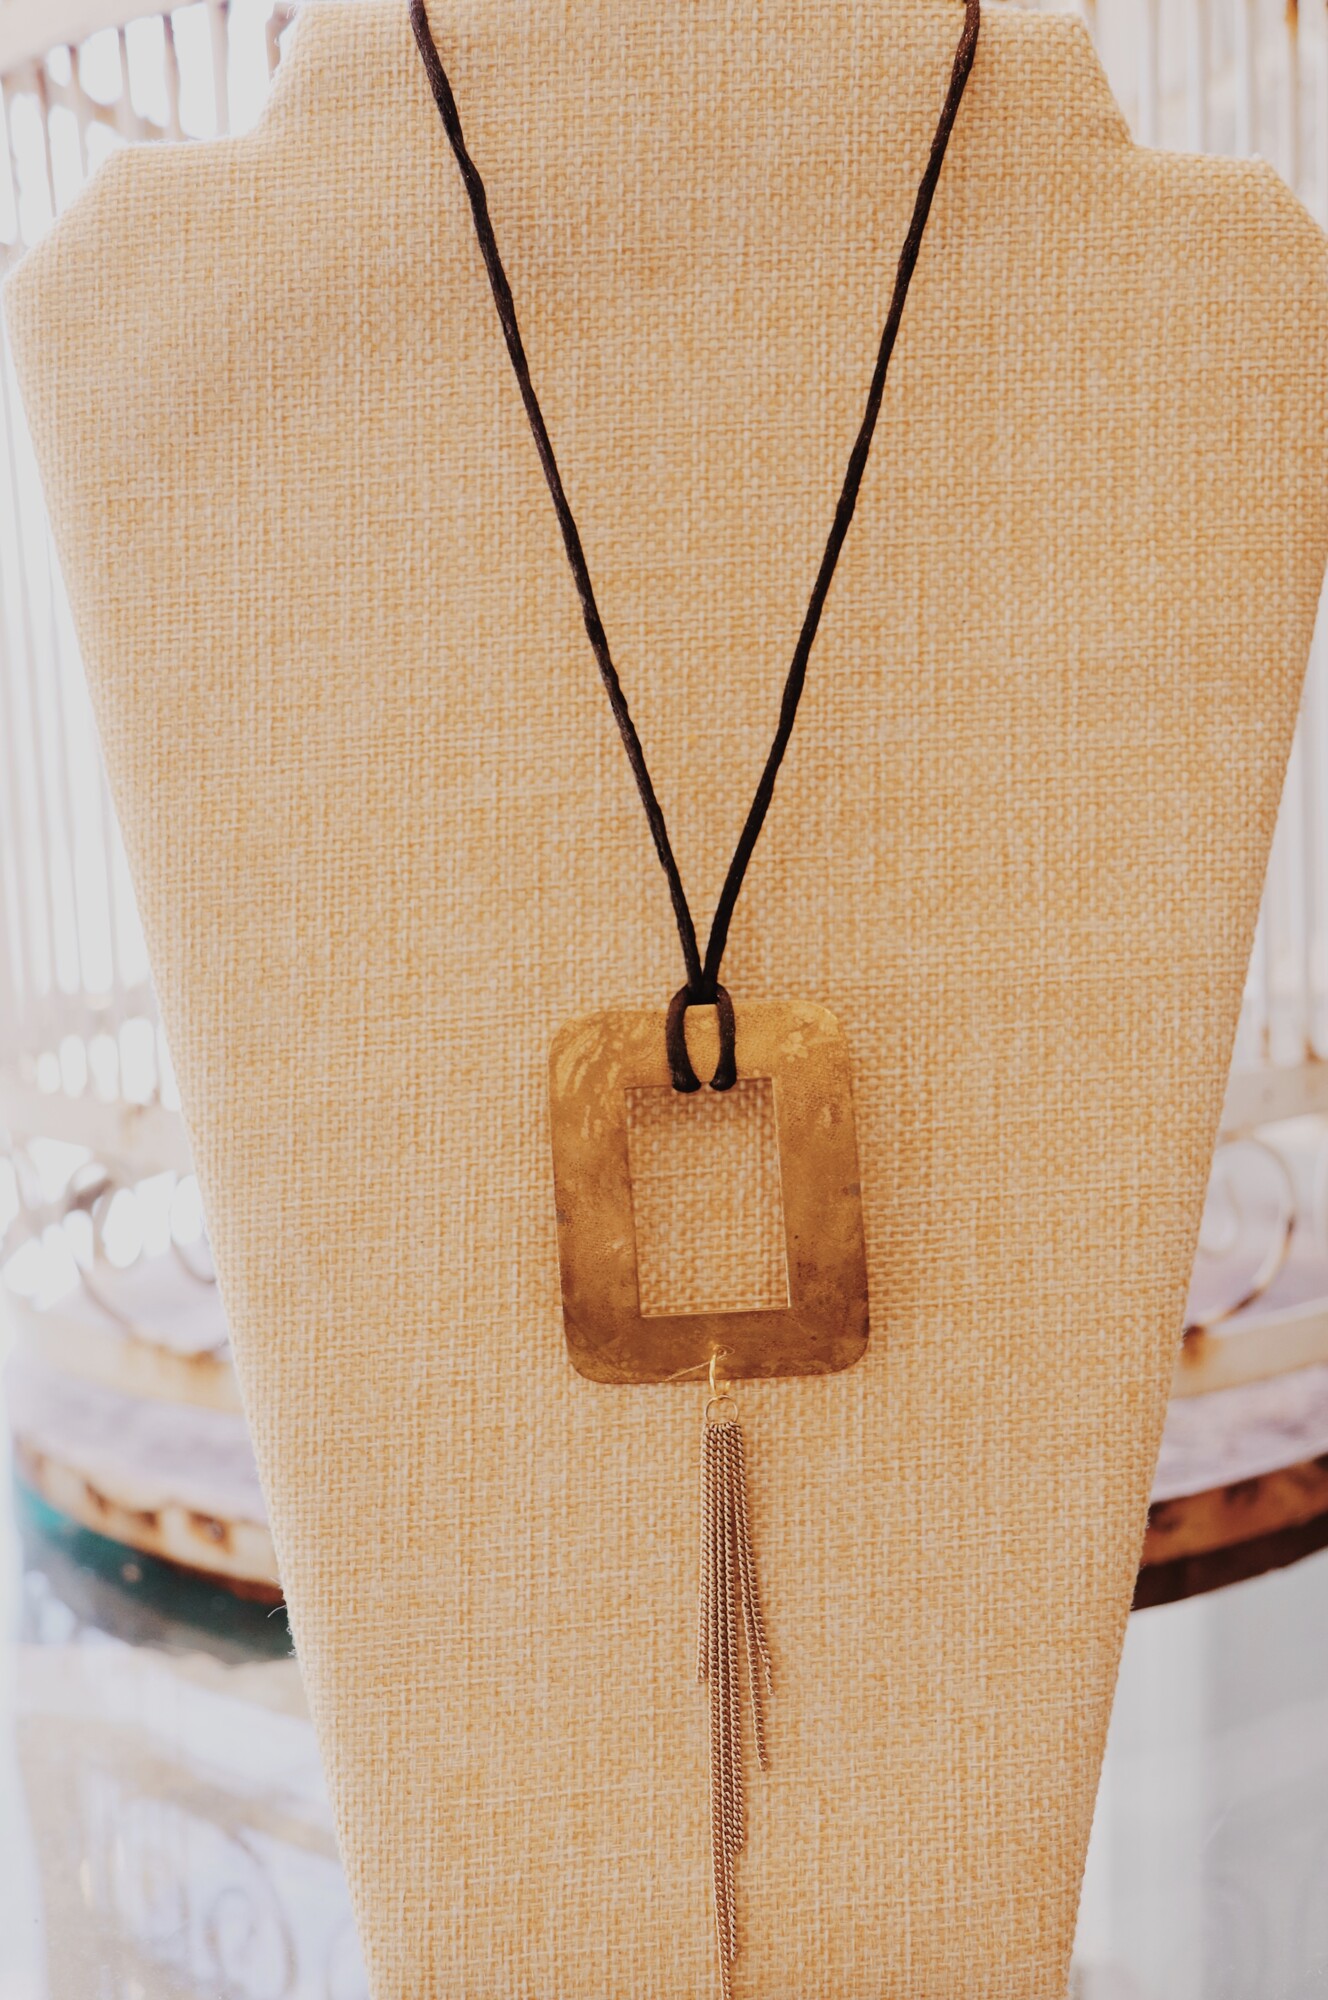 This necklace from Kelli Hawk Designs was handmade from vintage pieces! The beautiful brass pendant and fringe chain measures 5.5 inches long, and the necklace is on a 15 inch cord with a 2 inch extender.